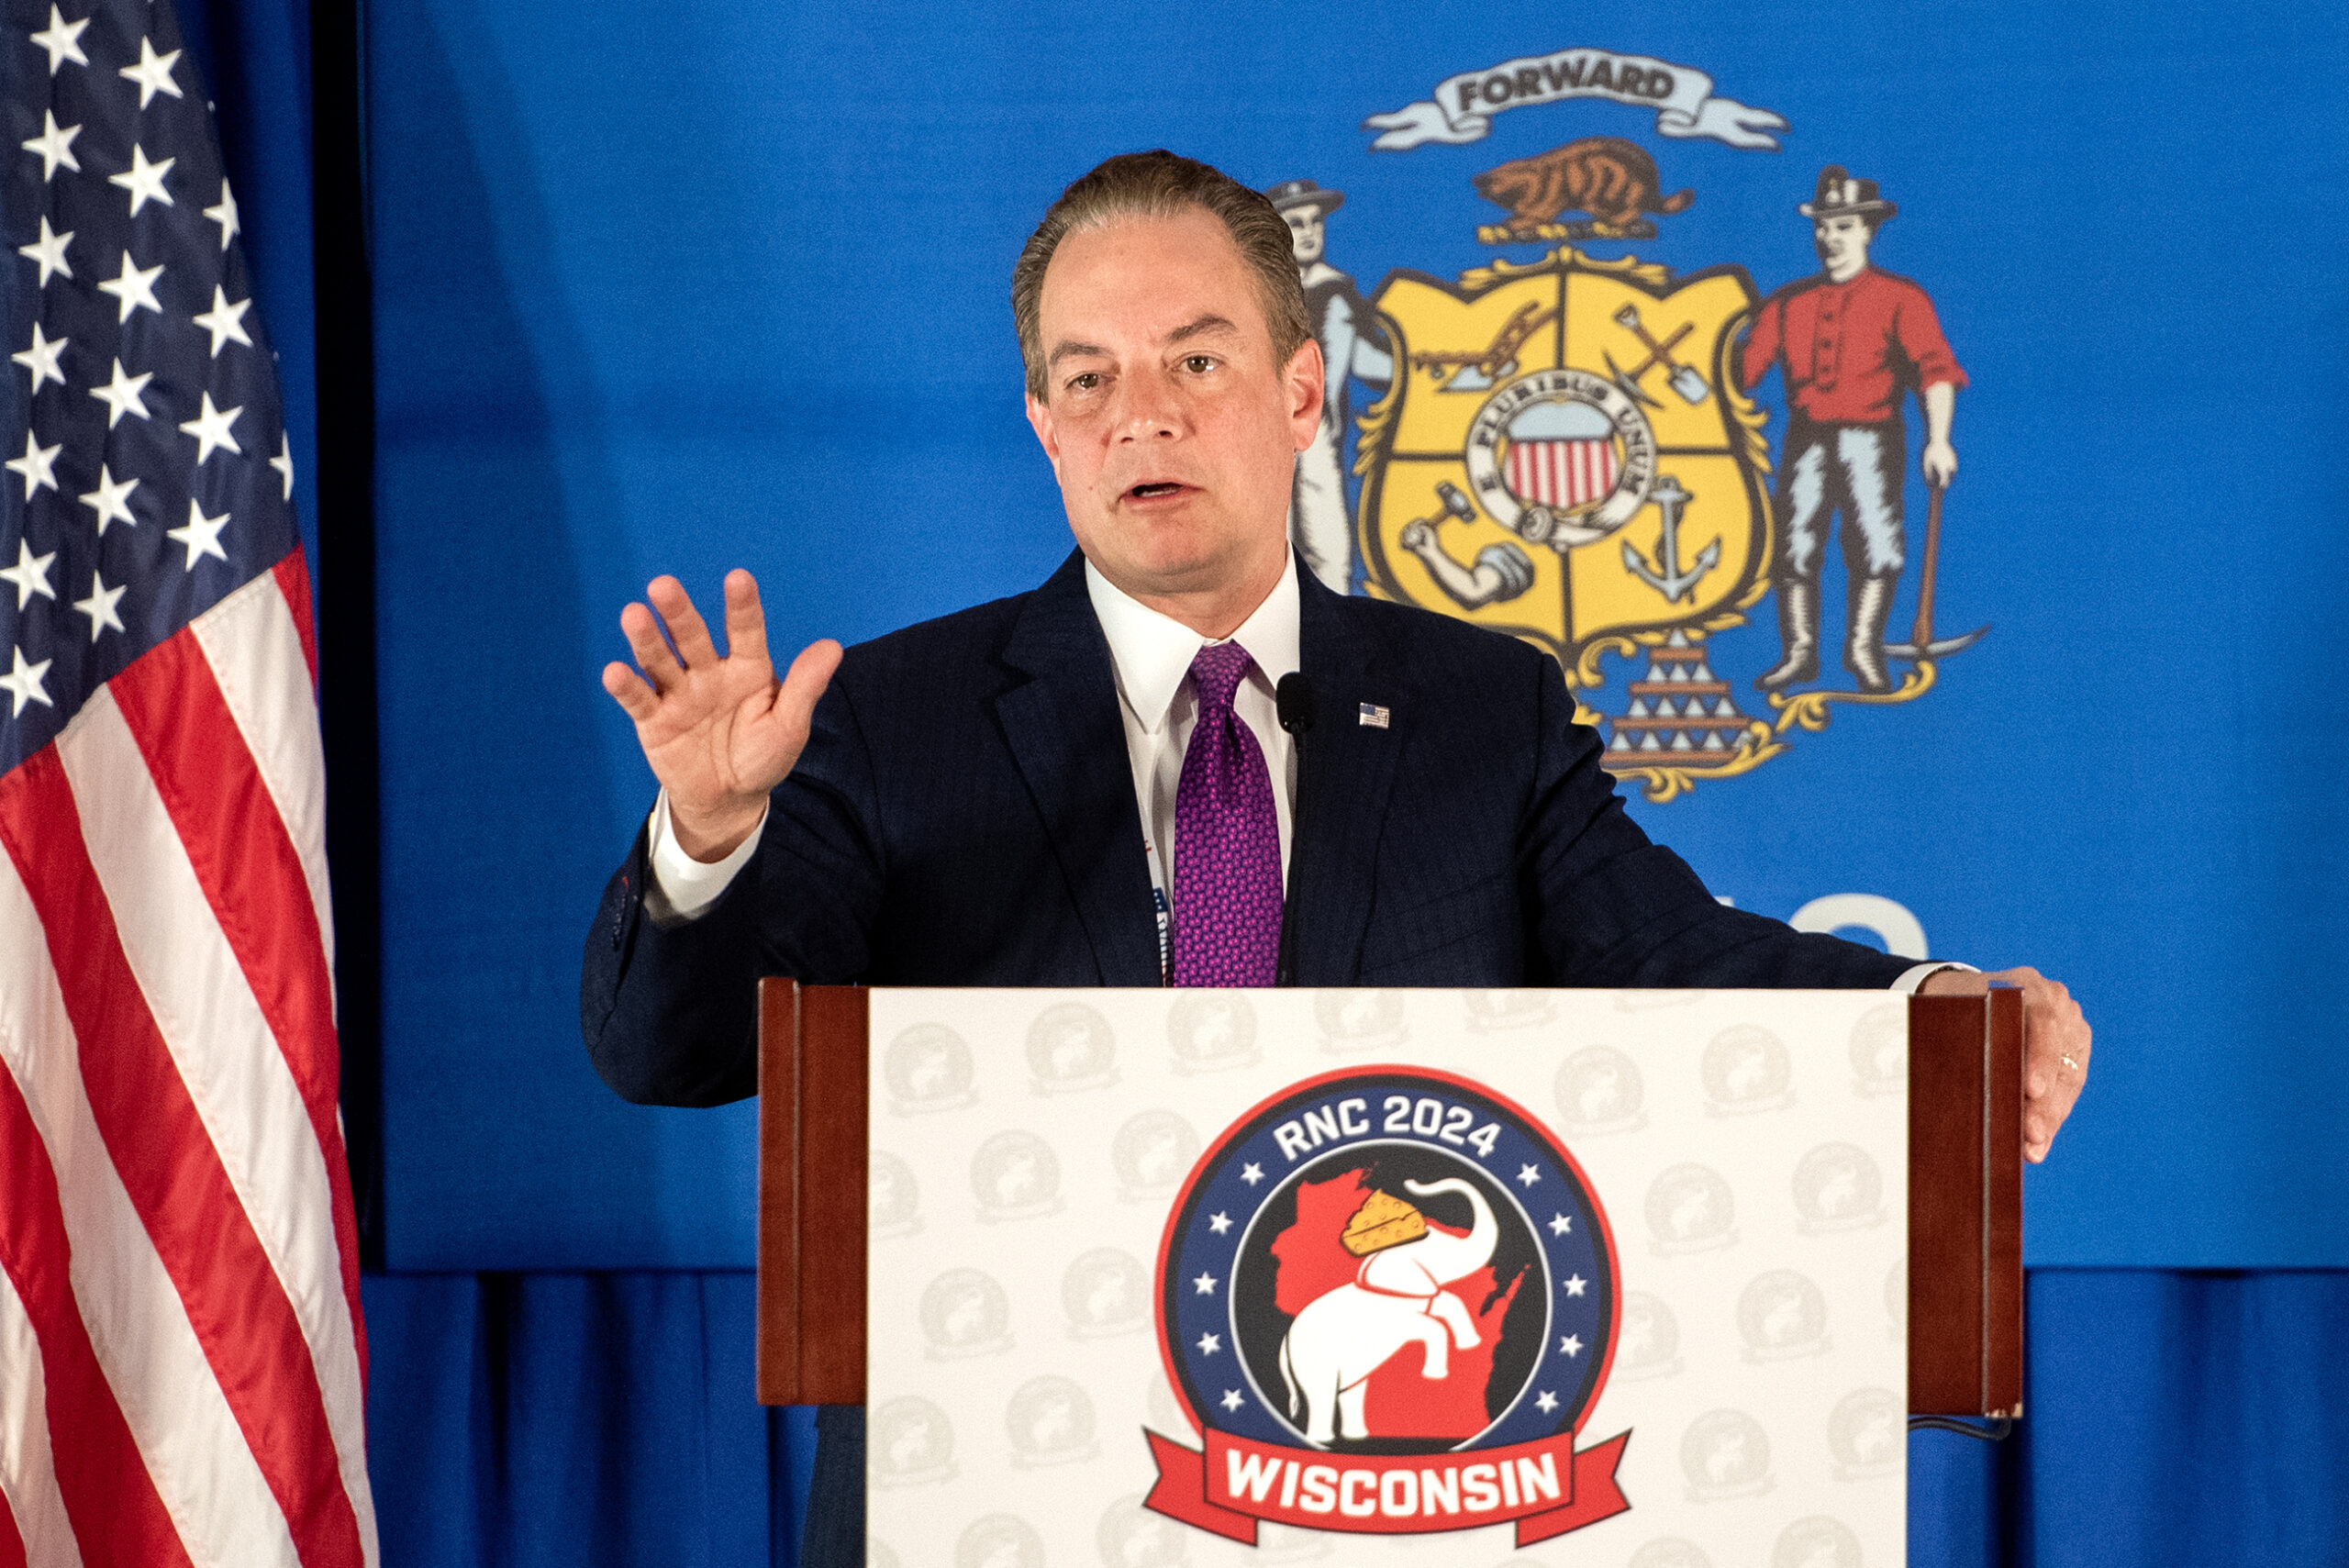 Reince Priebus says Republicans need to get excited about ‘boring’ voter outreach